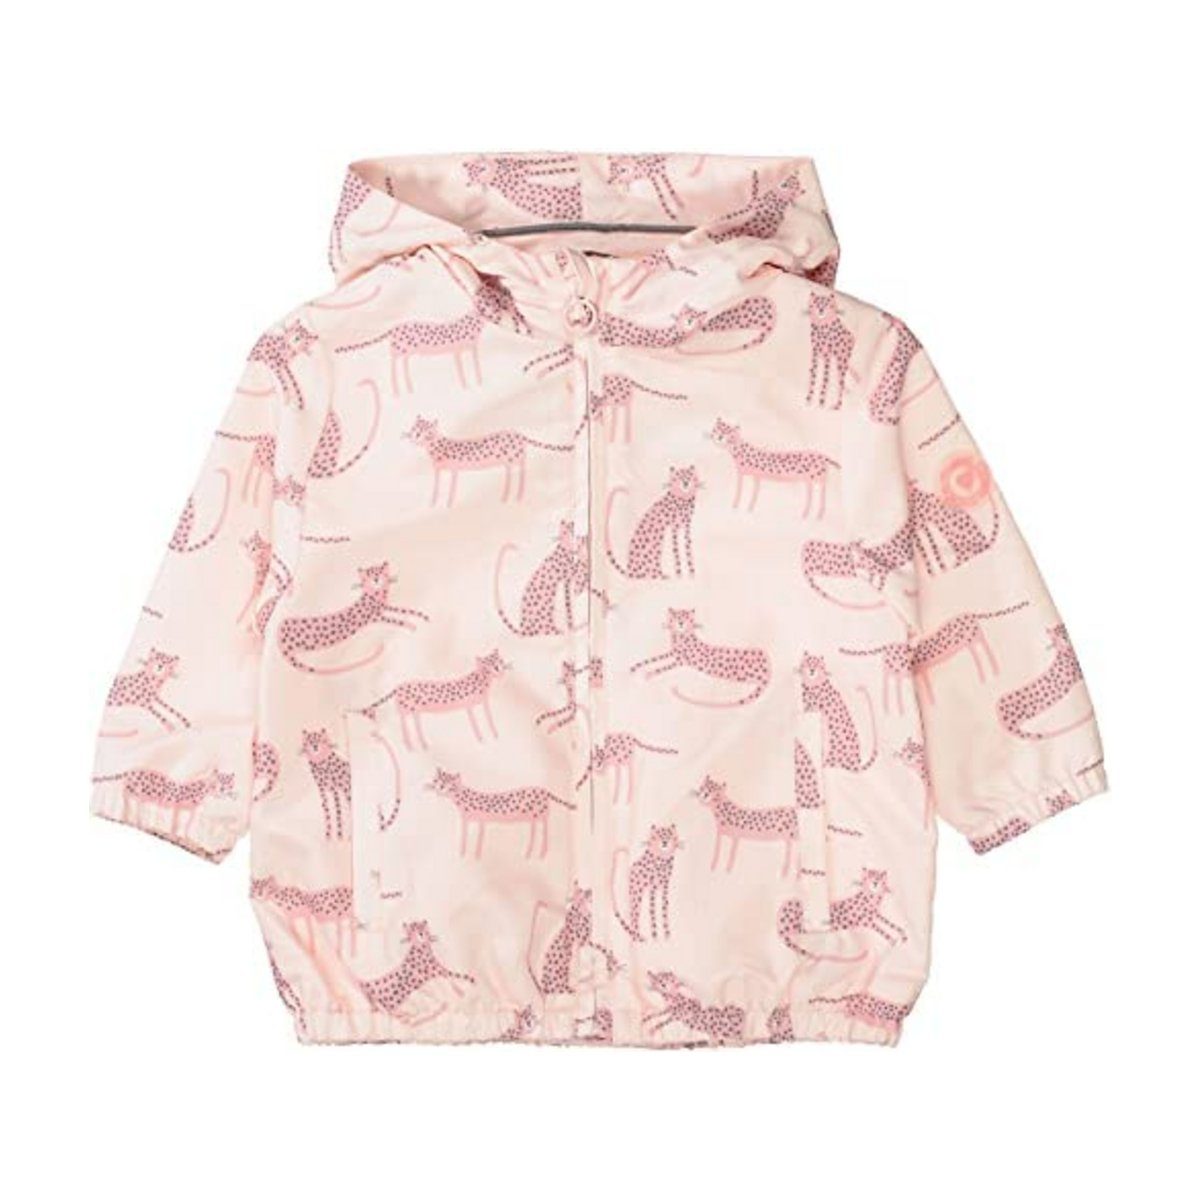 textil Anorak STACCATO (1-St) passform rose